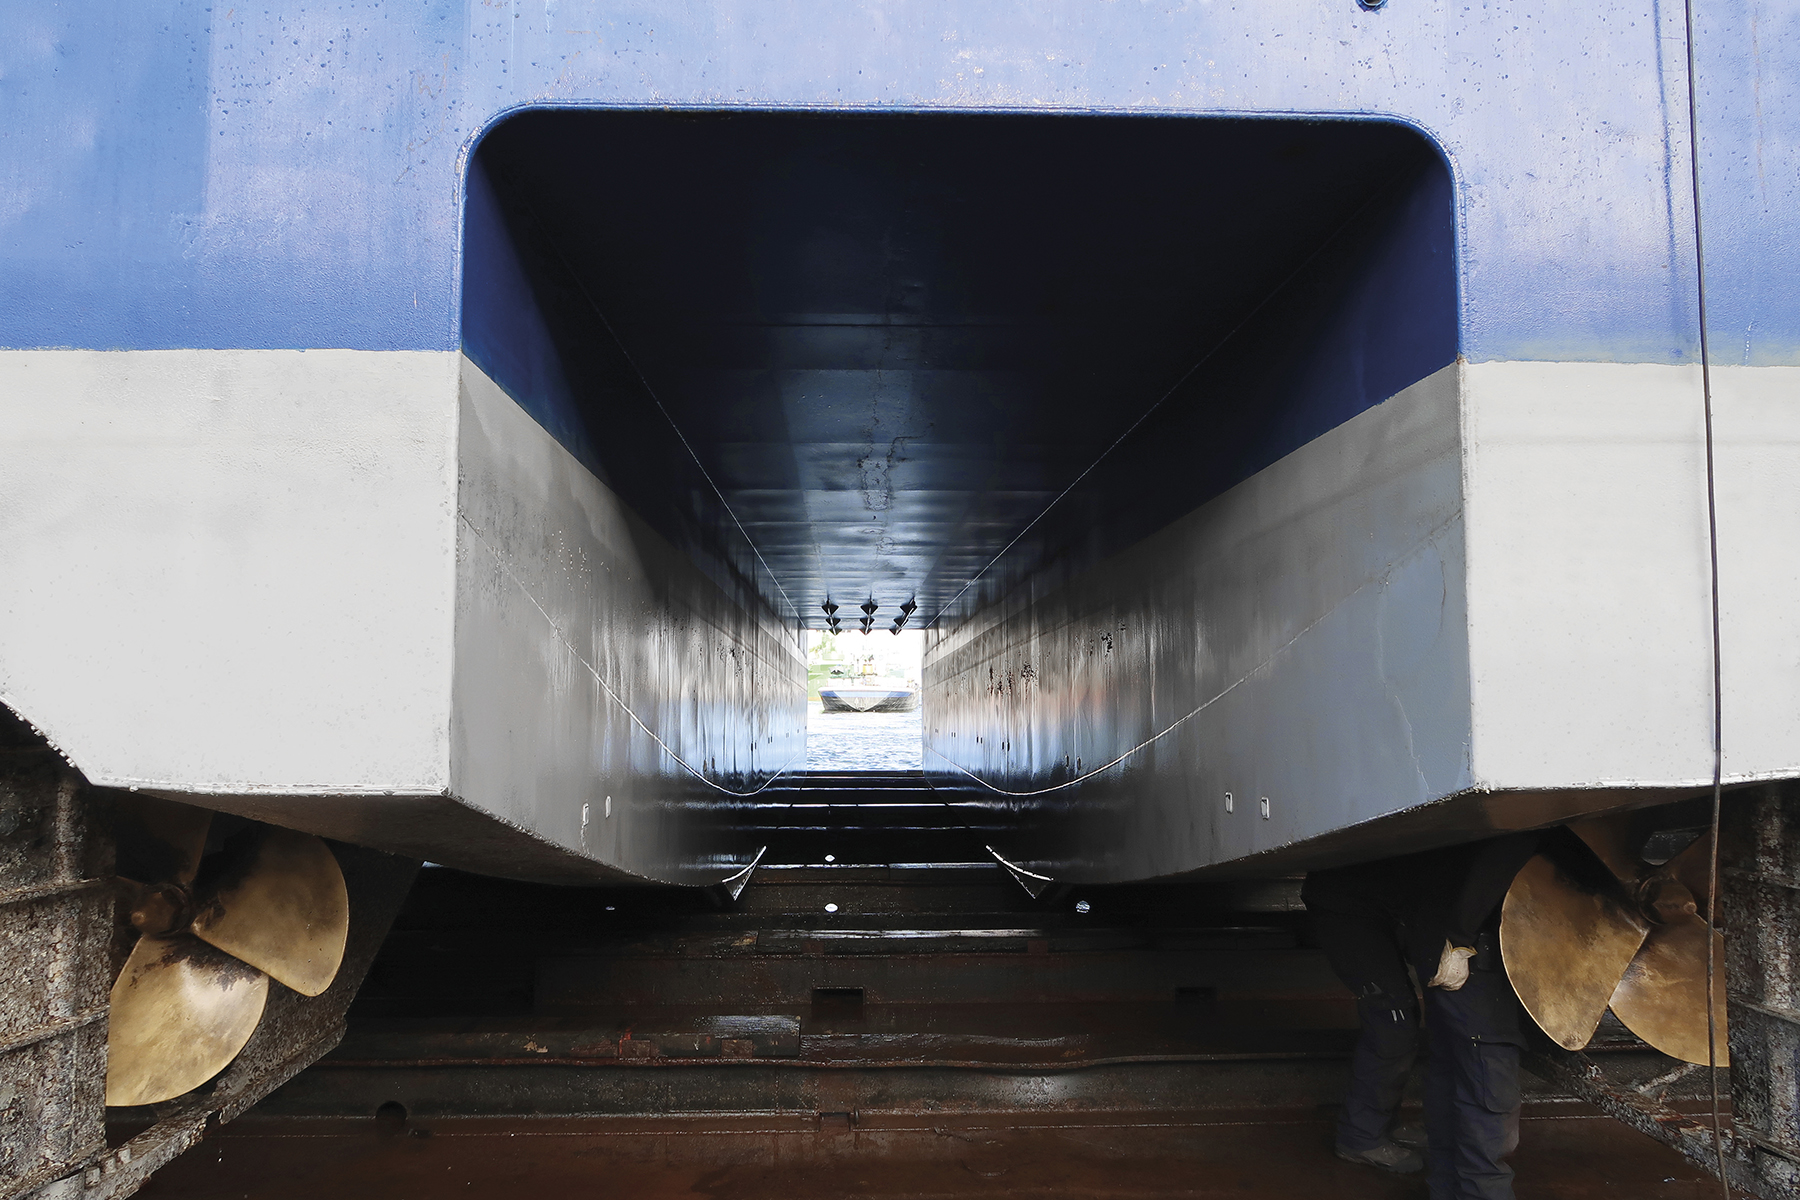 The hull of one of the Hydrex workboats in drydock 10 years after Ecospeed was applied, with no repainting during that interval.